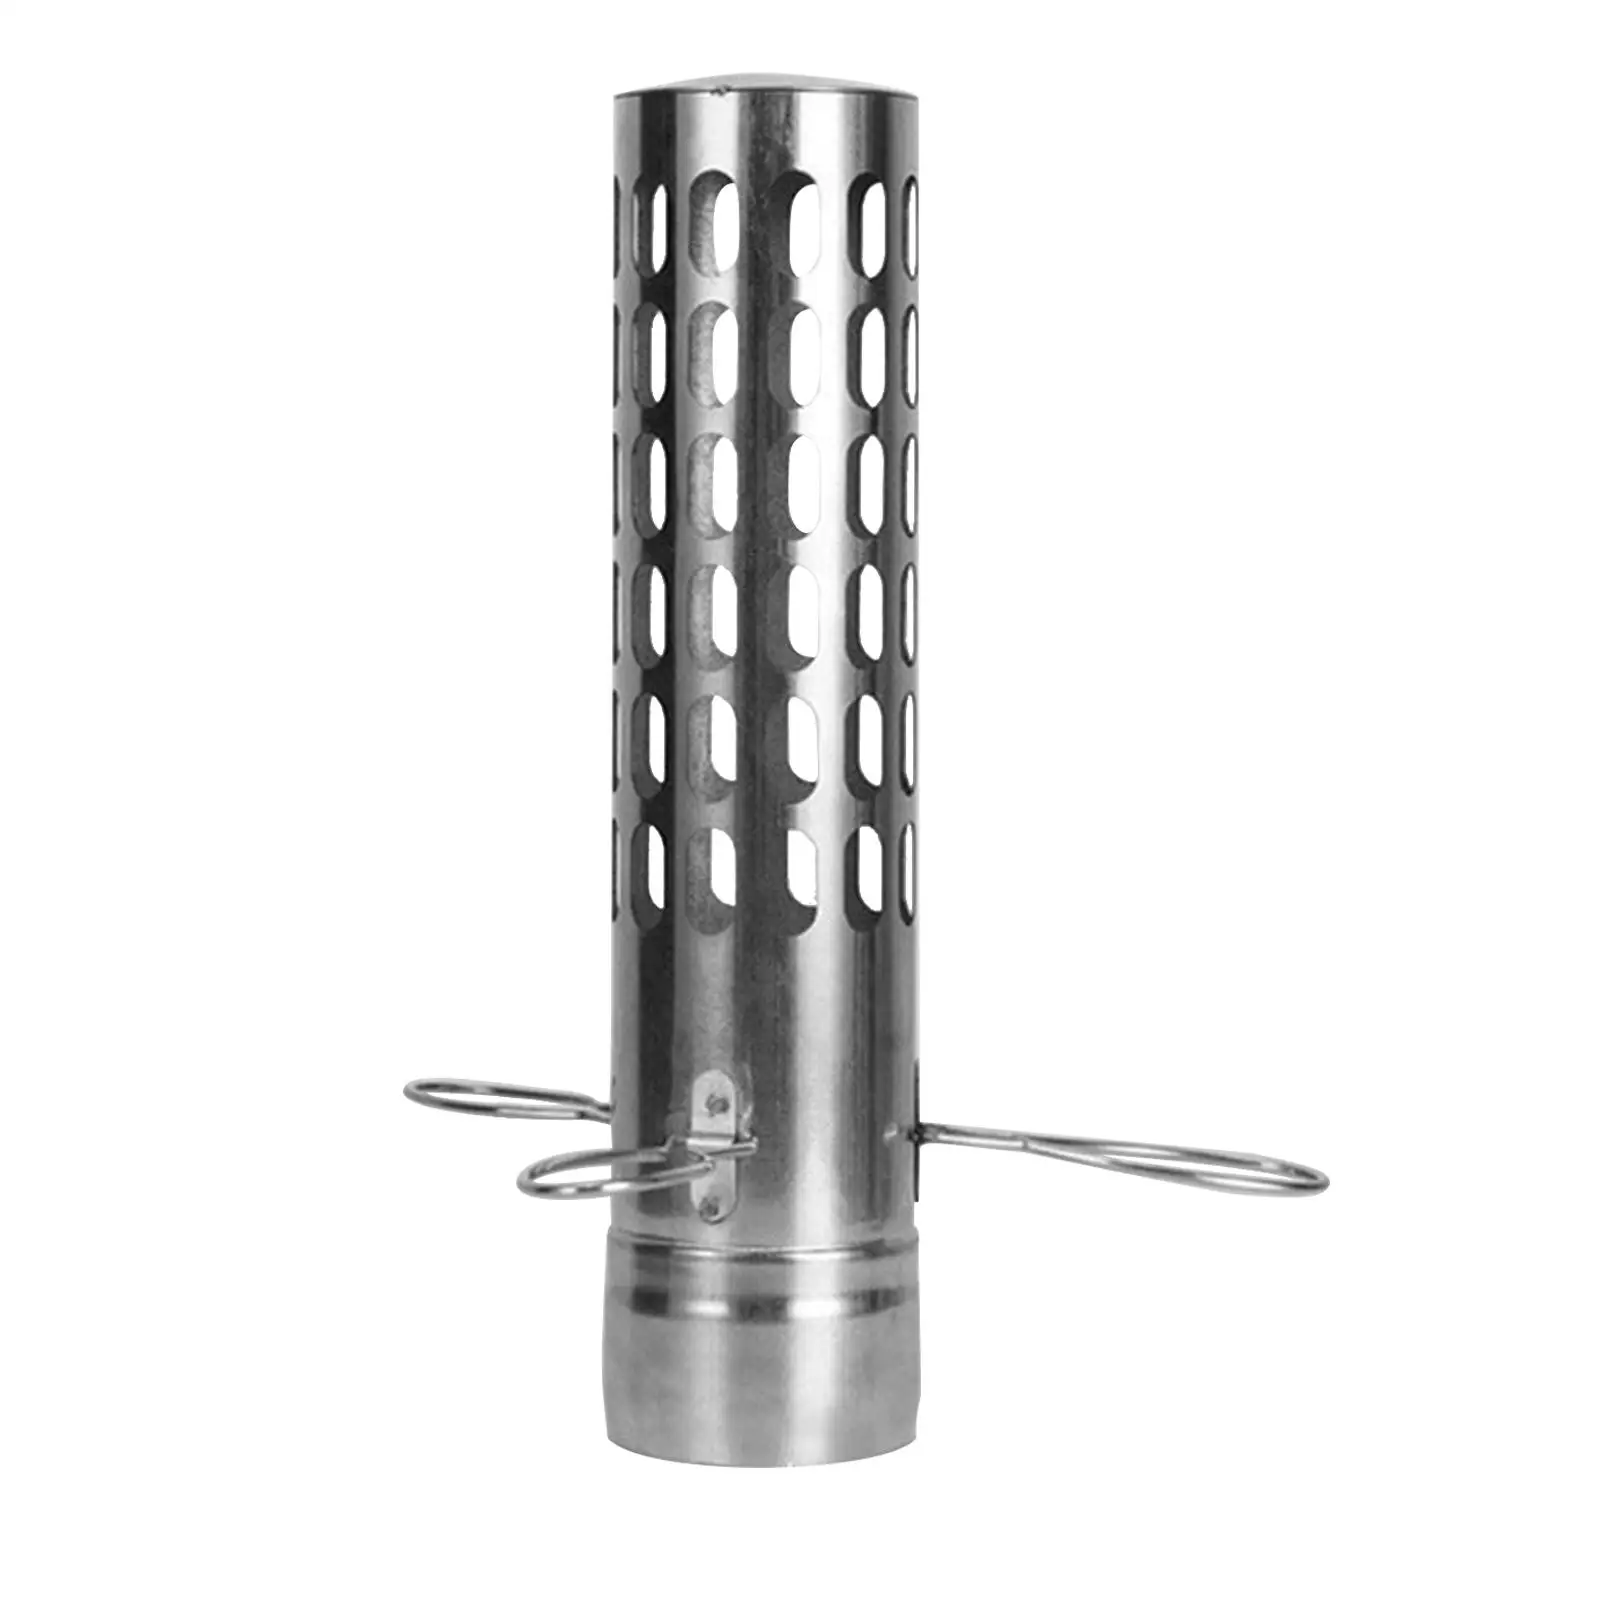 outdoorfashion Durable Stove Chimney Accessories Cooking Camping Flue